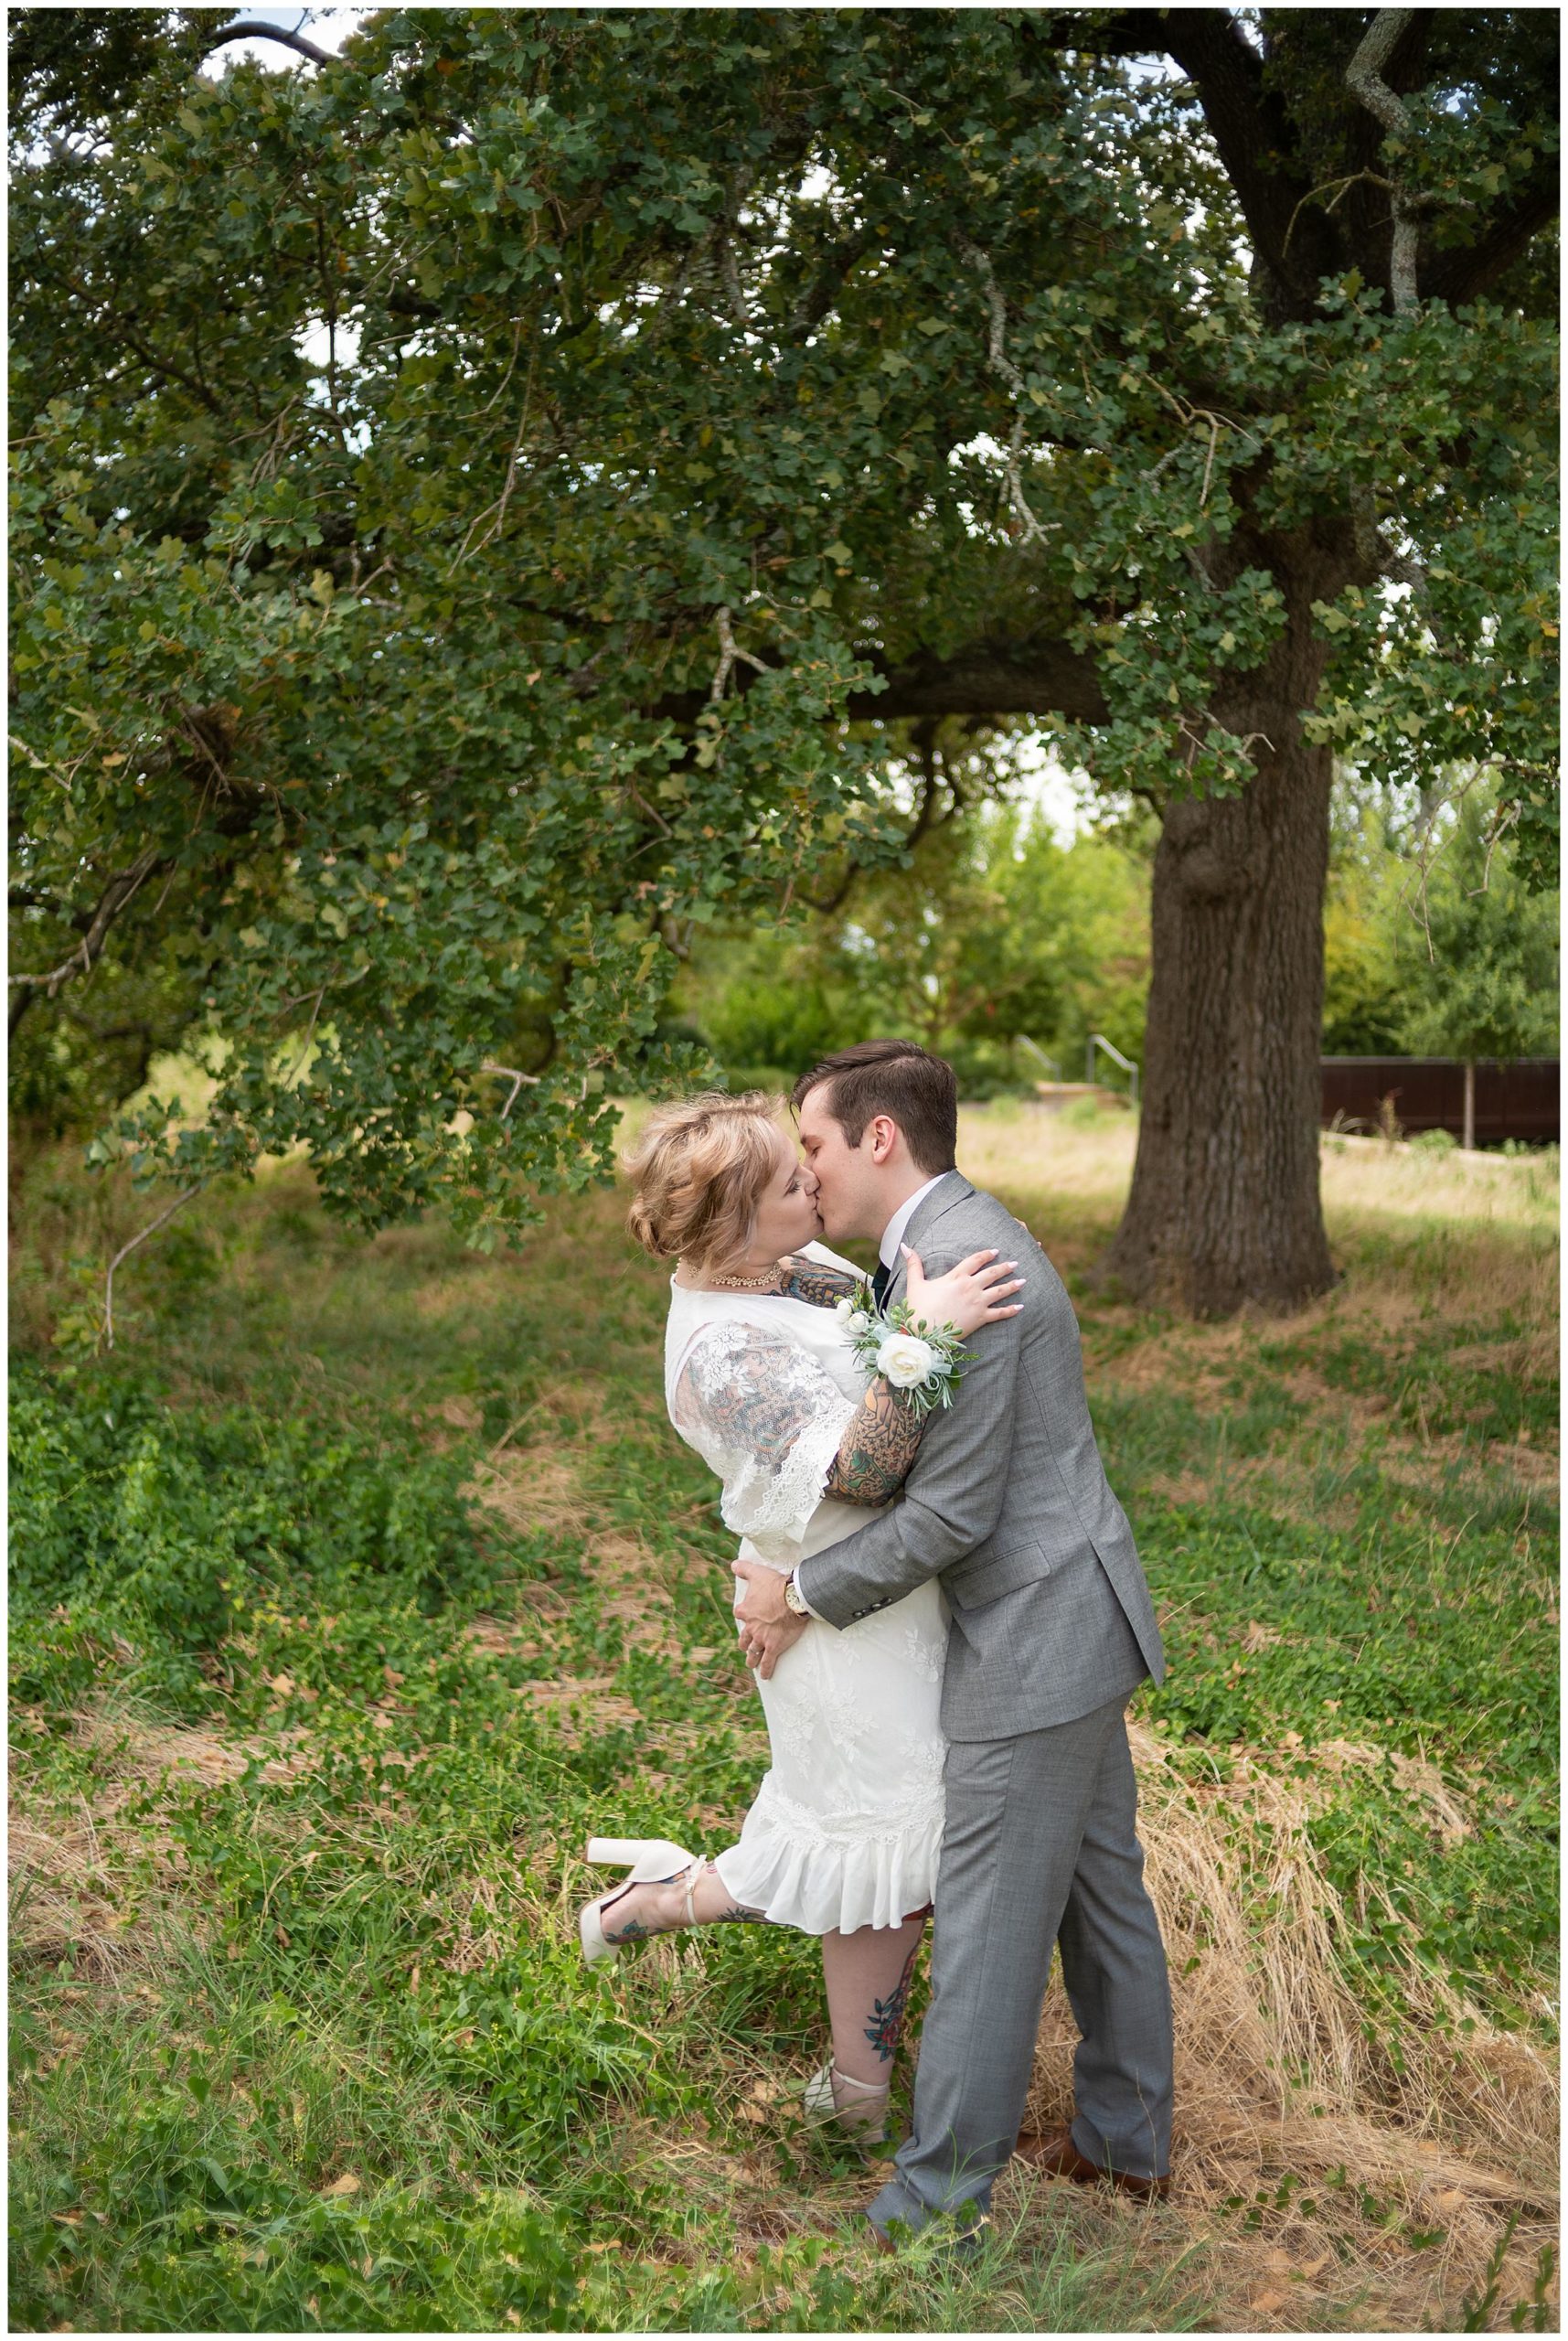 Newly wedding having a passionate kiss under a tree